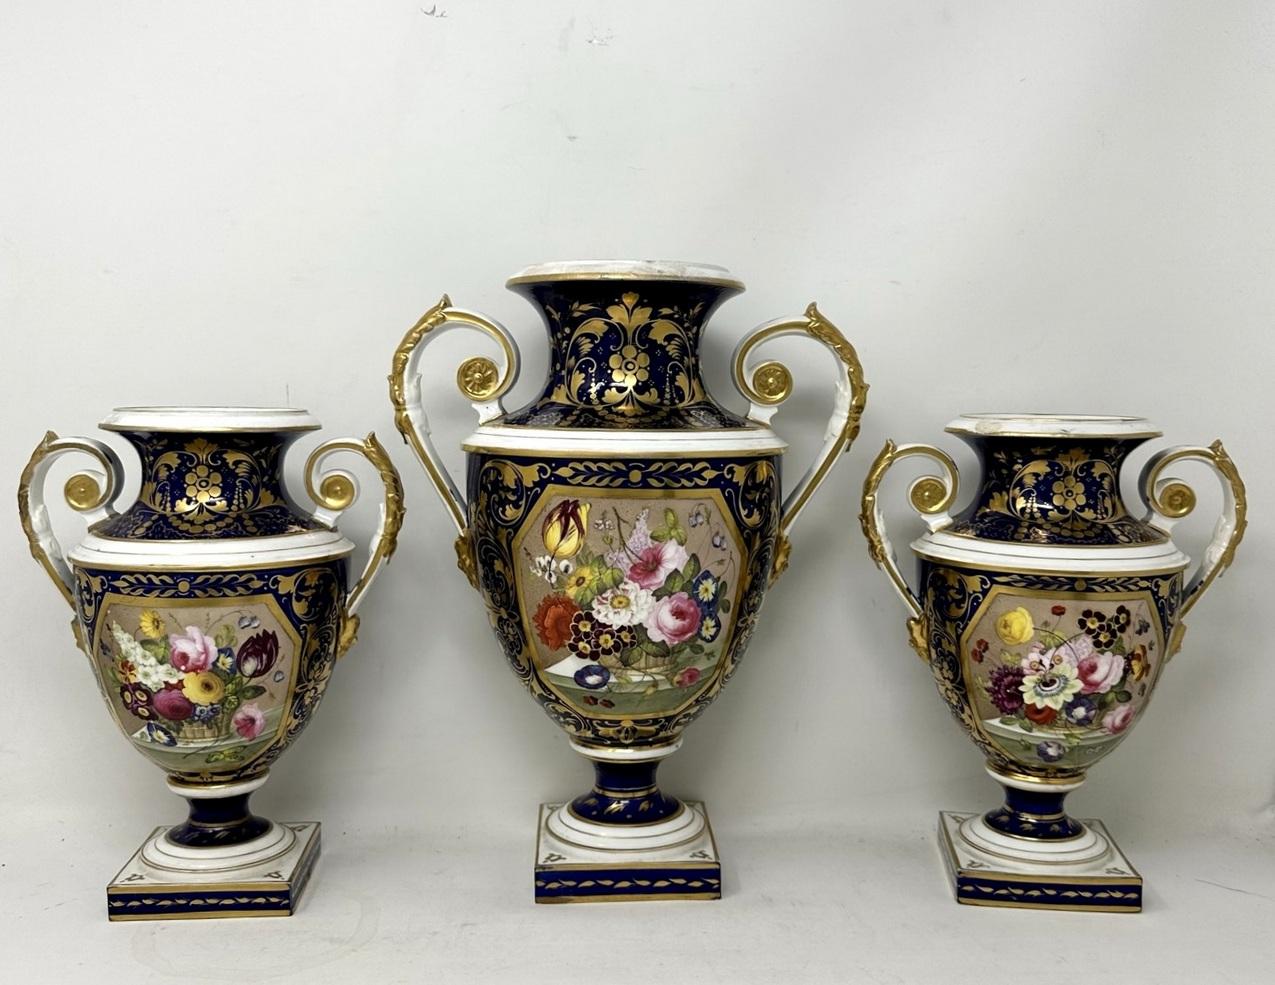 Antique Garniture English Royal Crown Derby Porcelain Vases by Thomas Steel 19C  In Good Condition For Sale In Dublin, Ireland